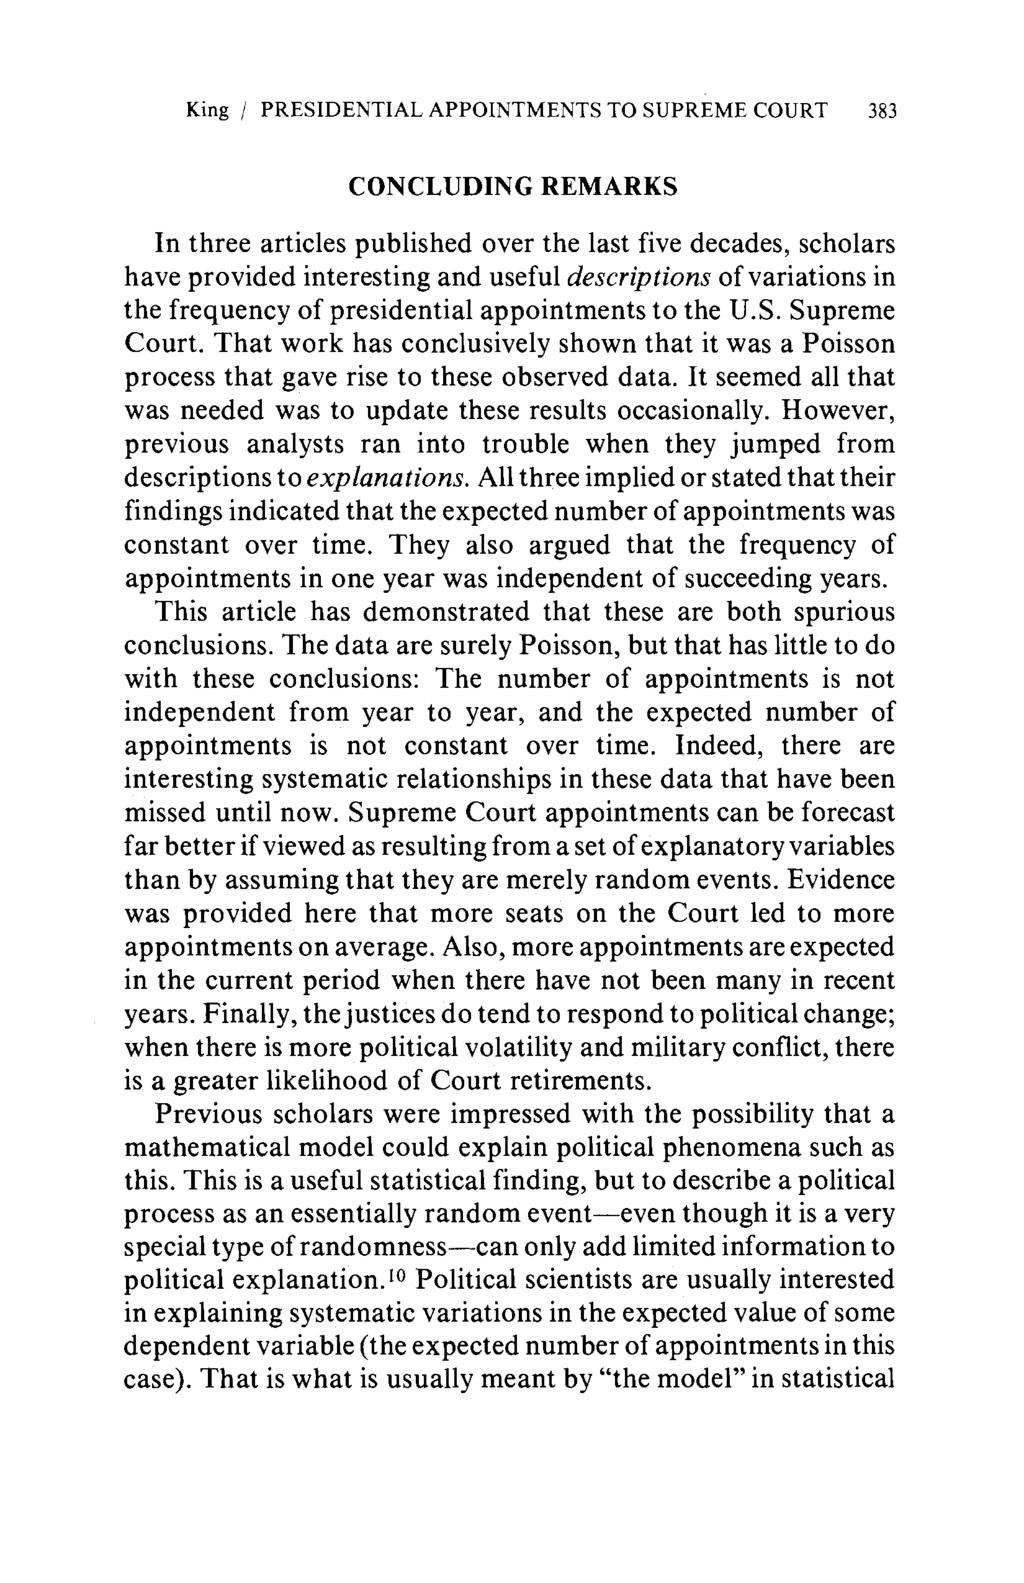 King / PRESIDENTIAL APPOINTMENTS TO SUPREME COURT 383 CONCLUDING REMARKS In three articles published over the last five decades, scholars have provided interesting and useful descriptions of